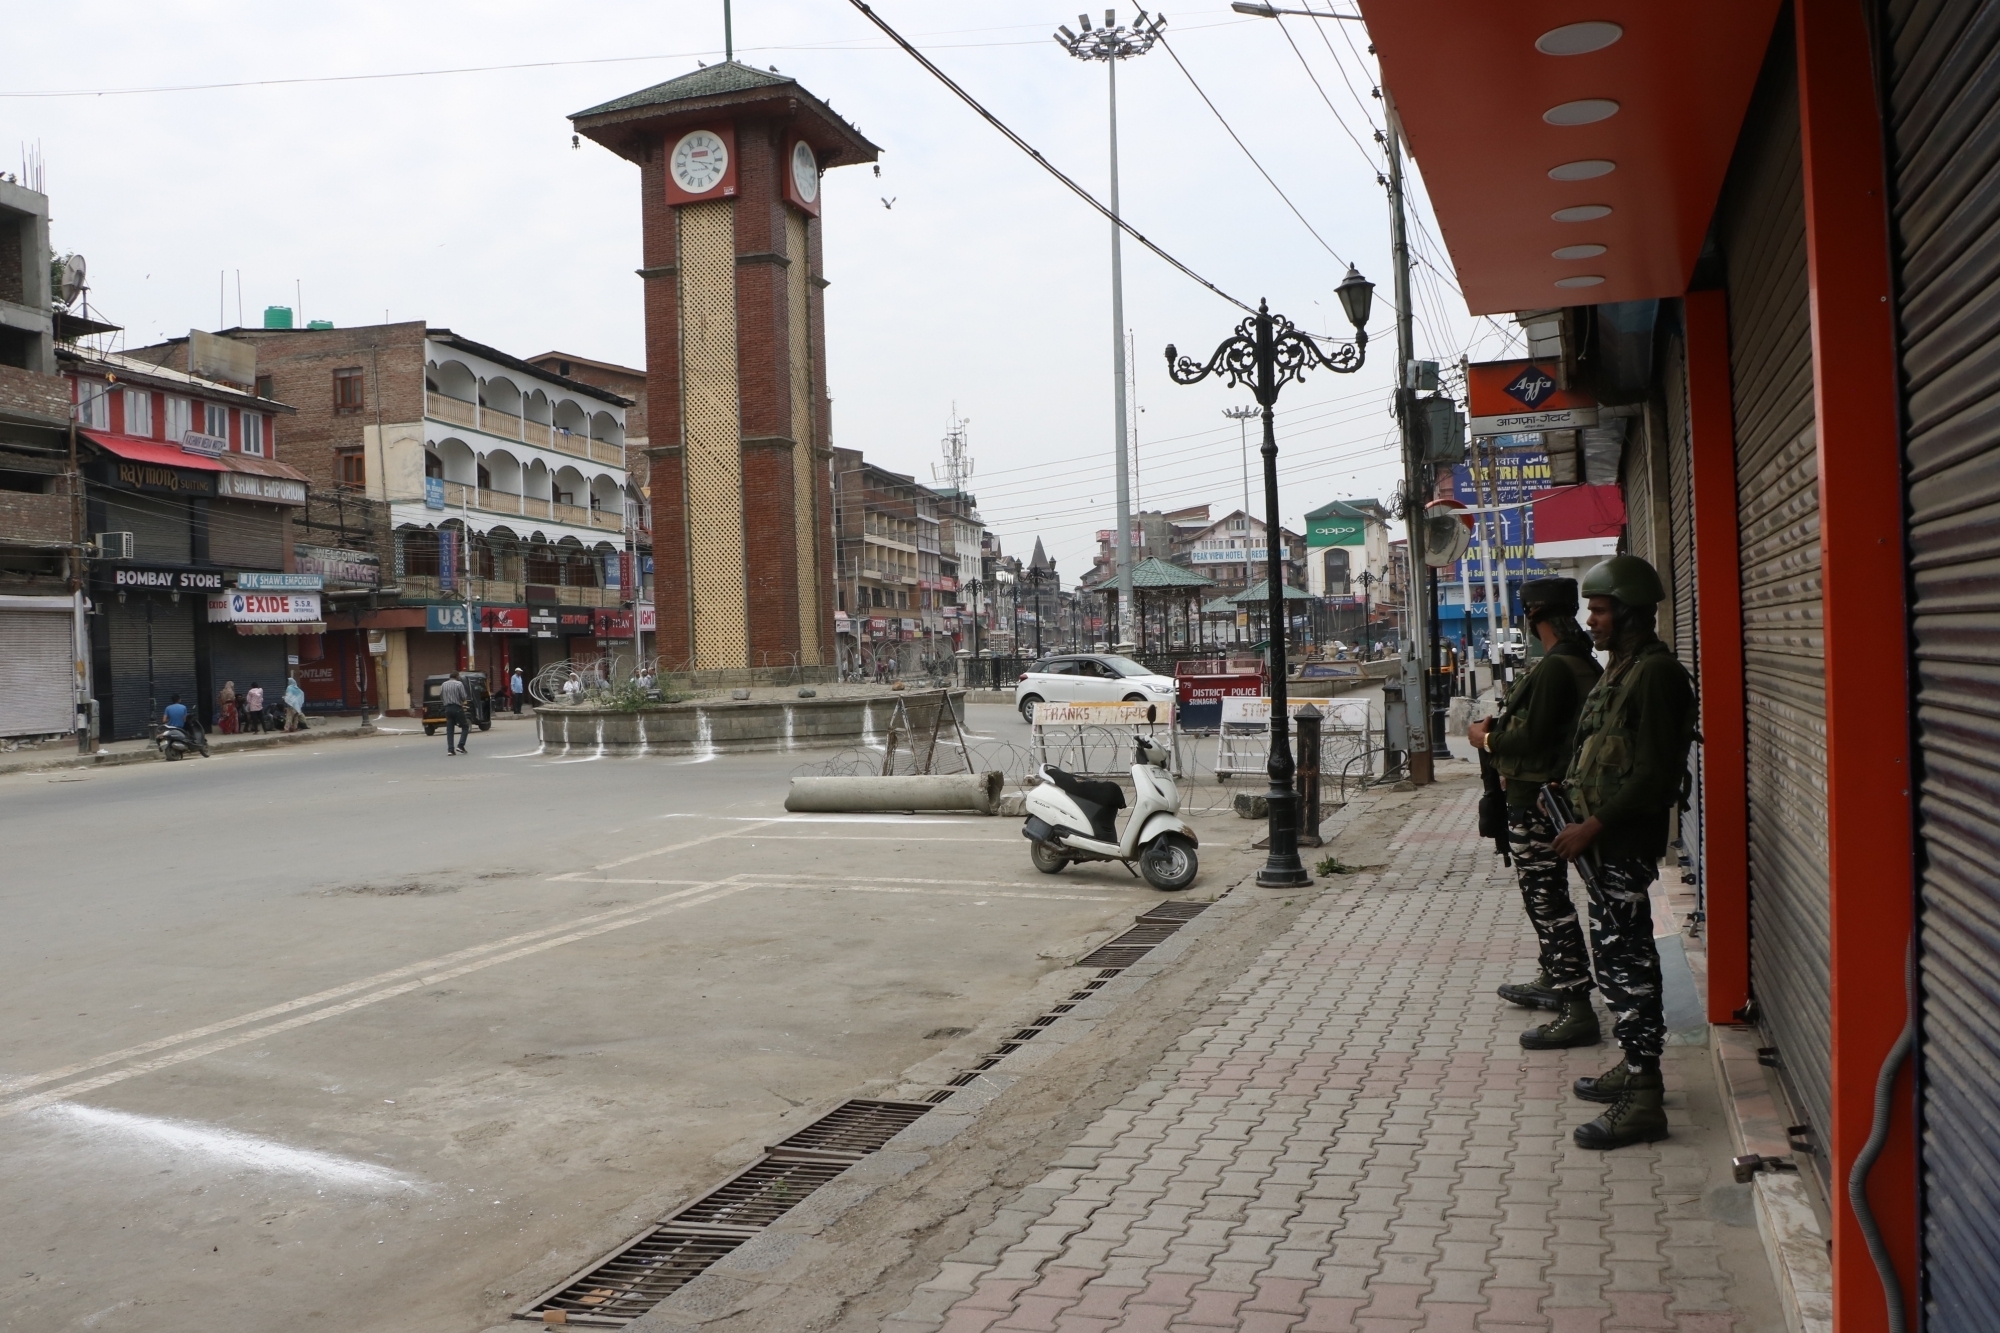 Entire Kashmir Valley to be treated as COVID-19 Red Zone